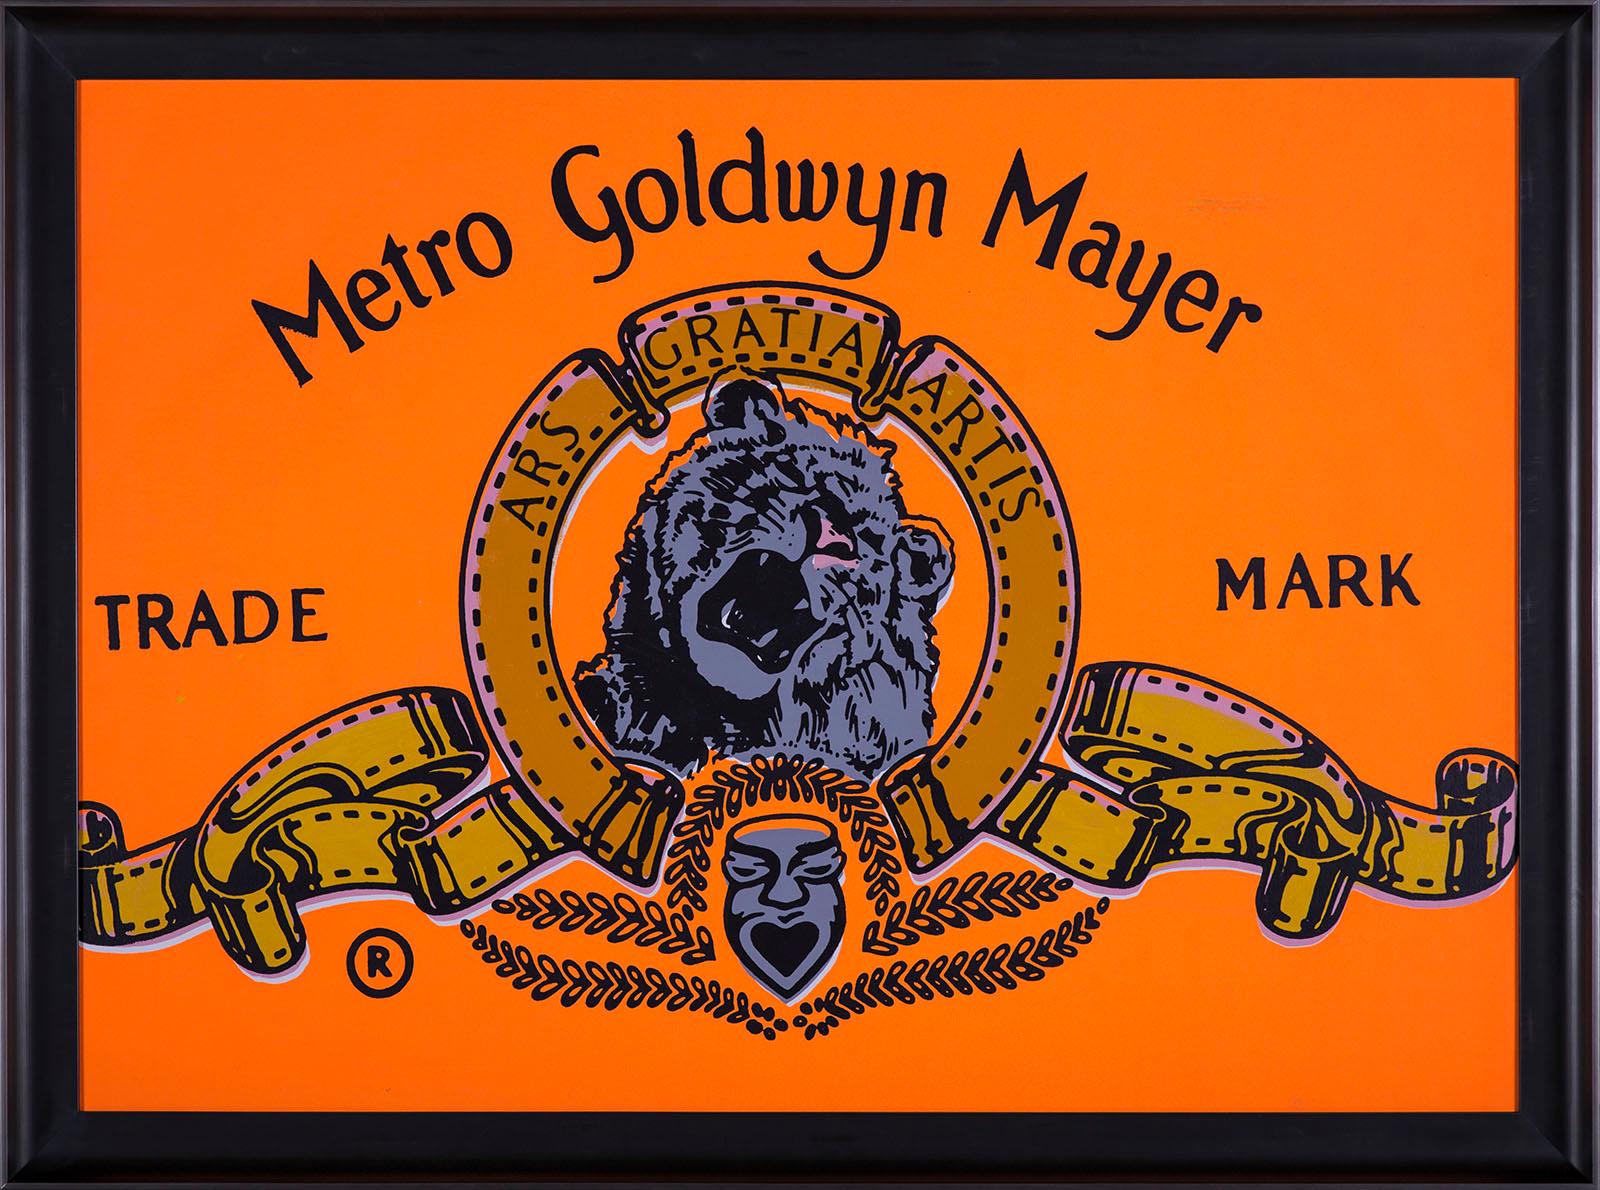 Artist: Steve Kaufman
Title: MGM Metro Goldwyn Mayer
Medium: Original Oil Painting on Screen print Canvas
Size: Canvas size 39' x 52'
Size Framed: 45" x 58"

Edition size: Unique meaning there may have been up to five created, but never a series.